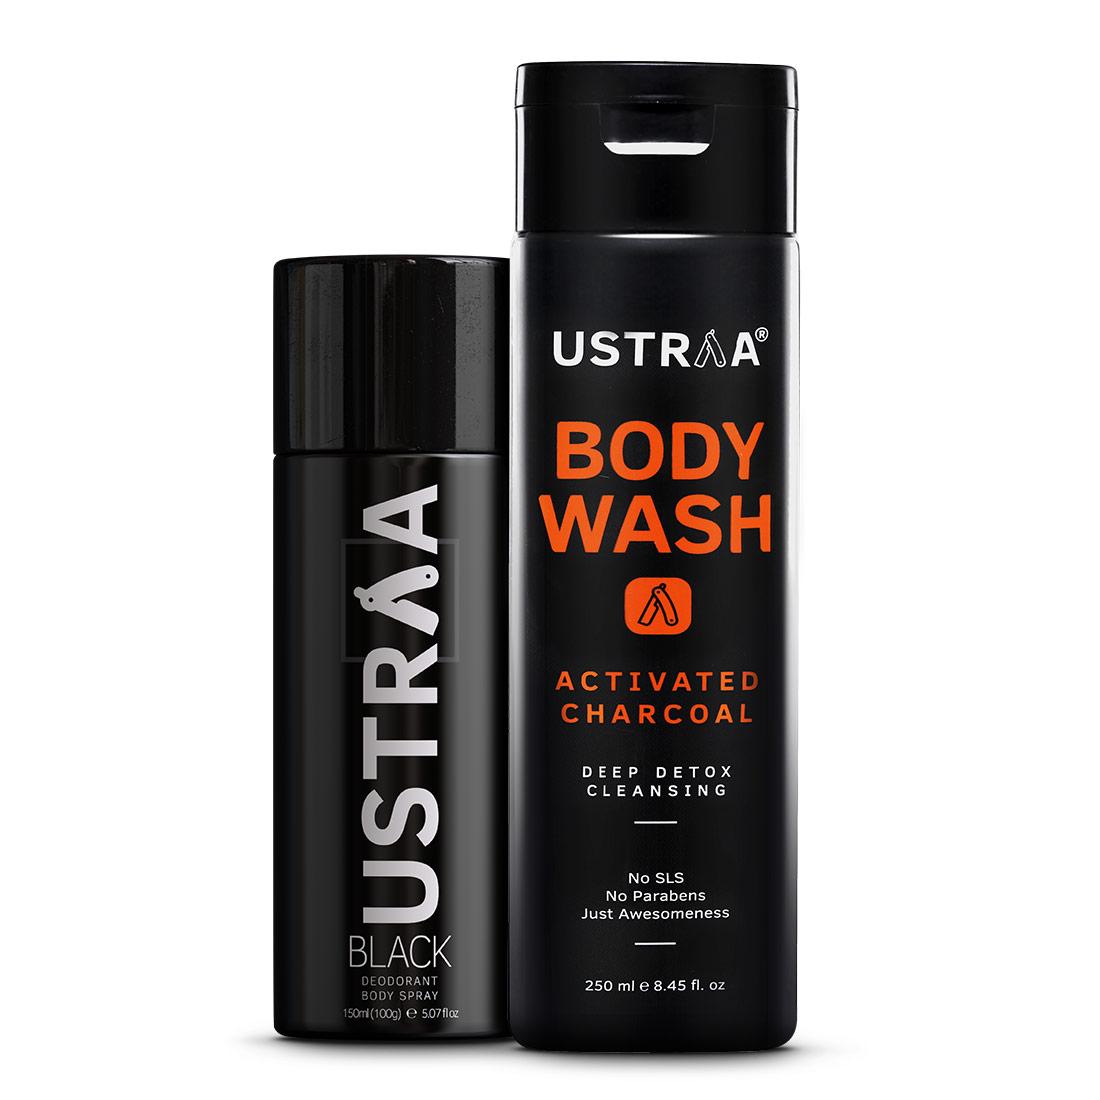 Ustraa Ultimate Combo For Men: Body Wash Activated Charcoal + Deodorant Black